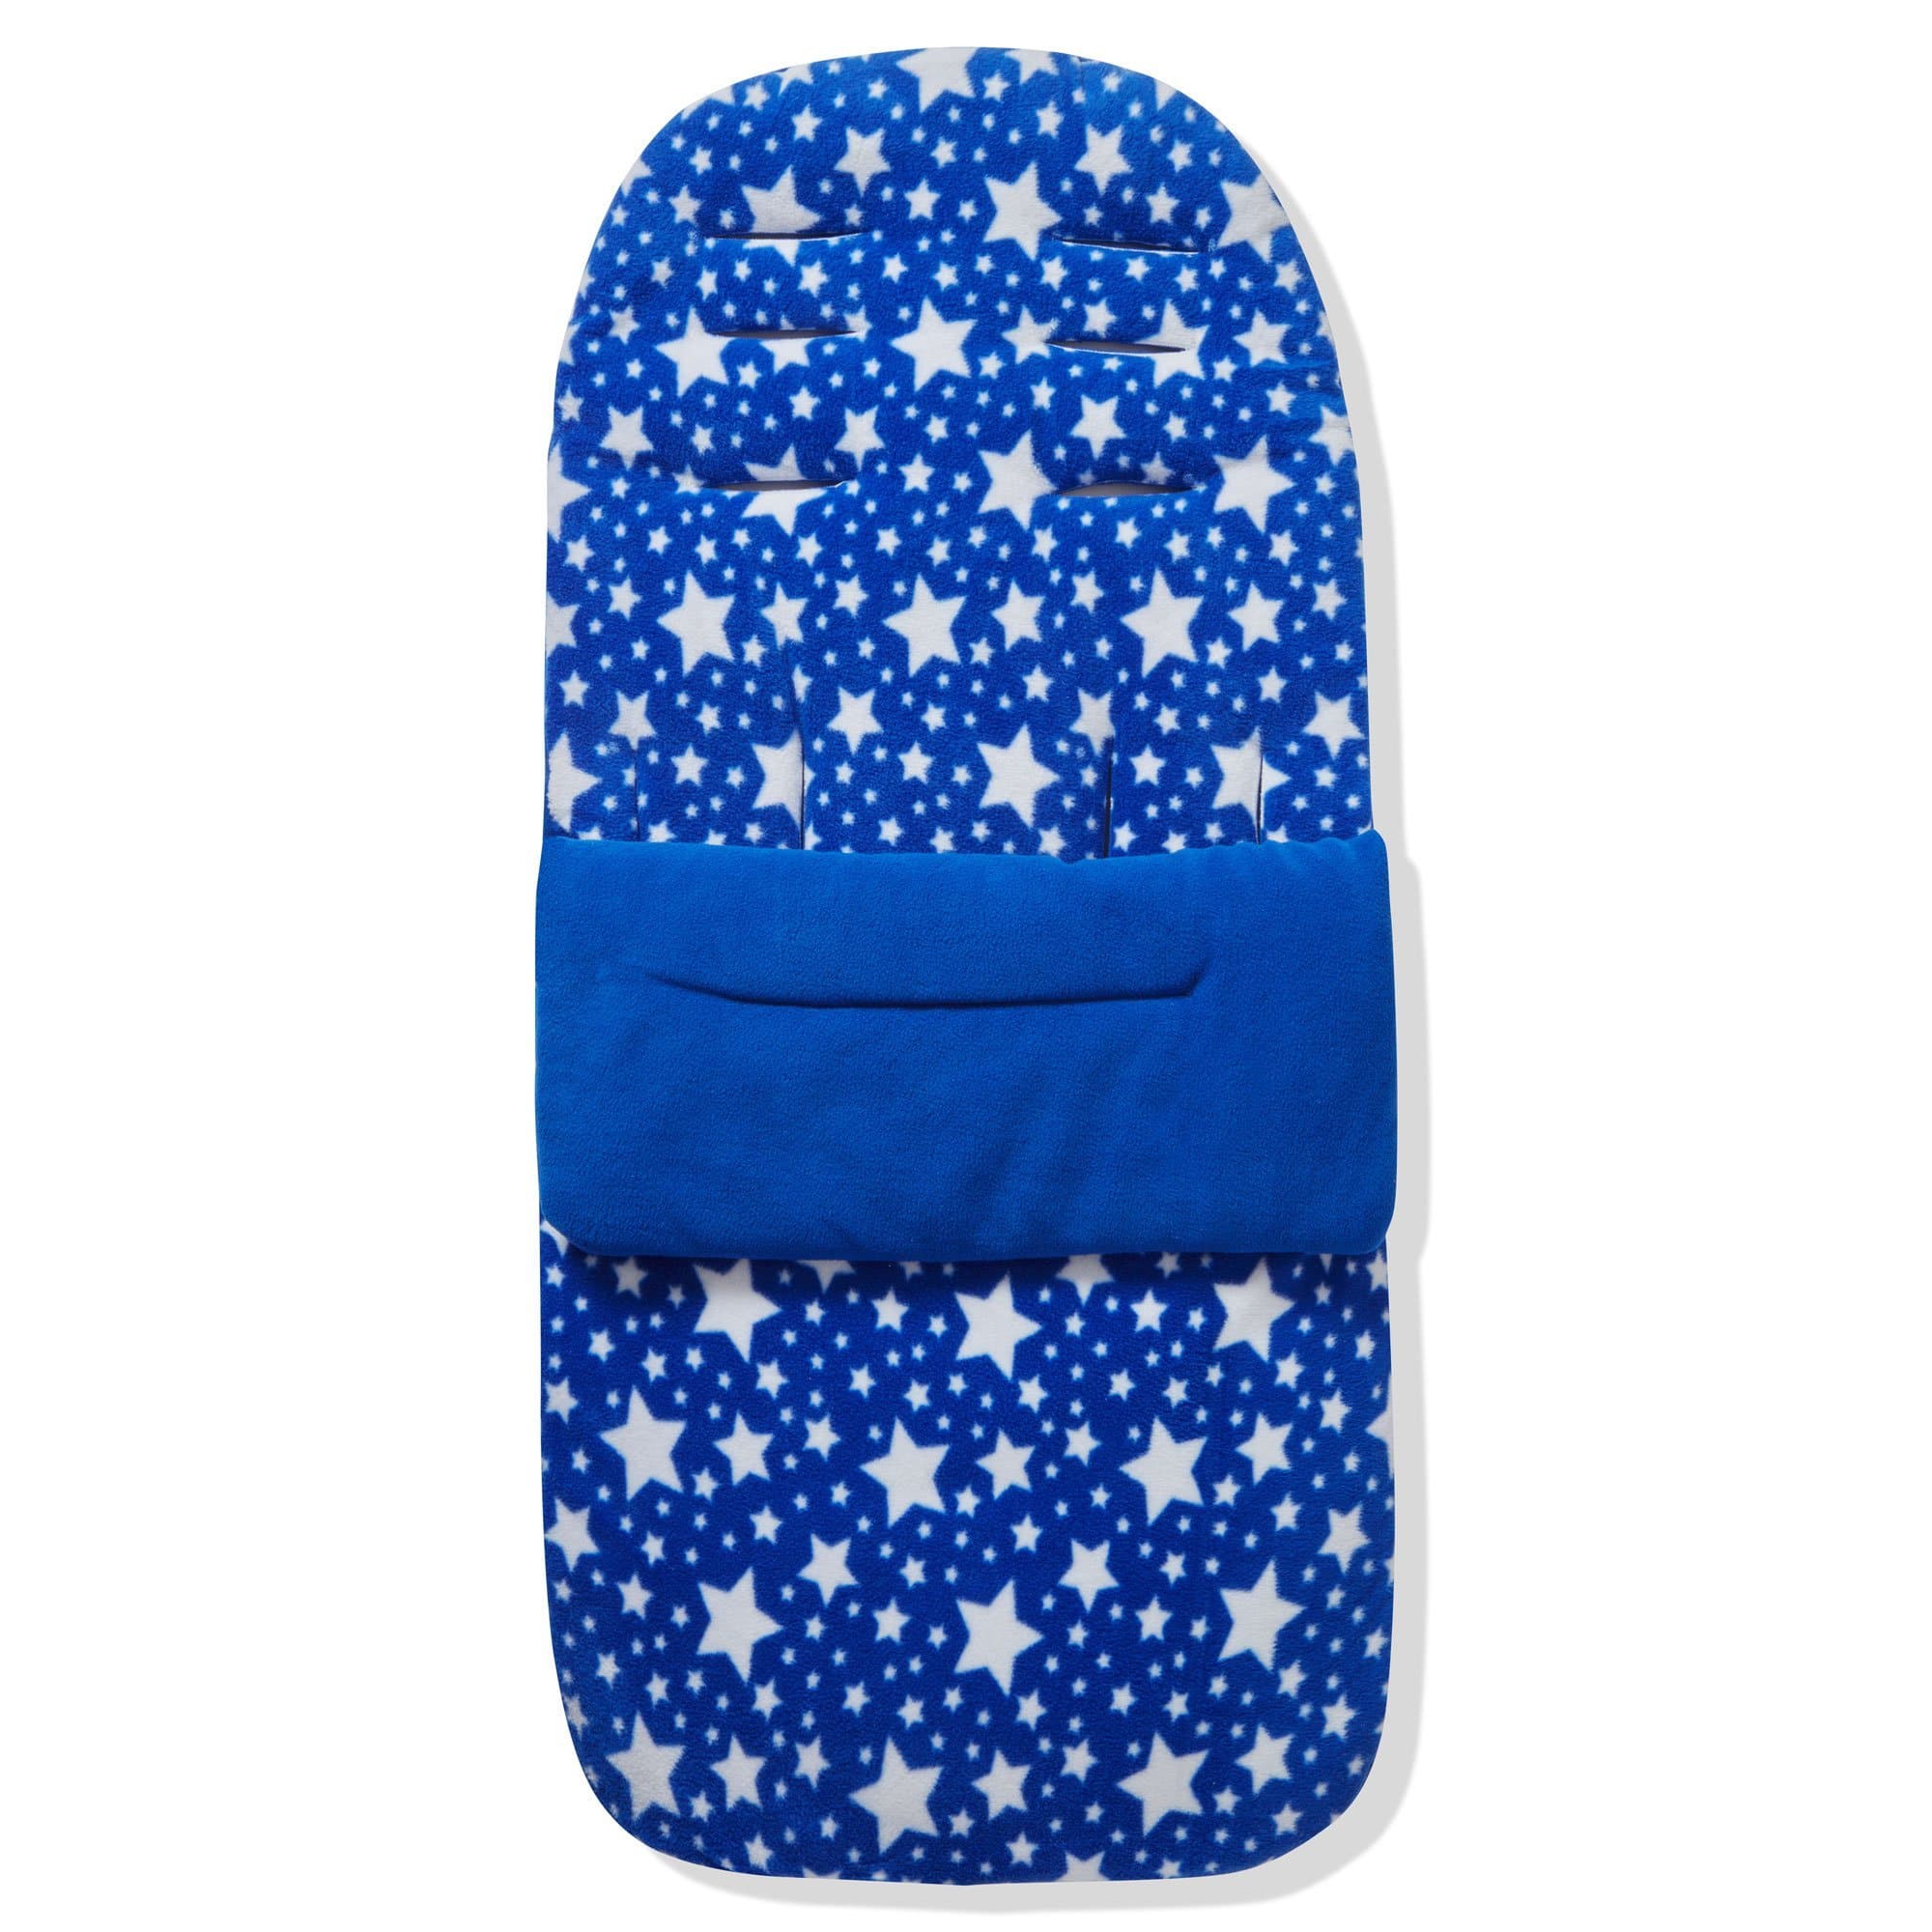 Fleece Footmuff / Cosy Toes Compatible with BabyDan - Blue Star / Fits All Models | For Your Little One